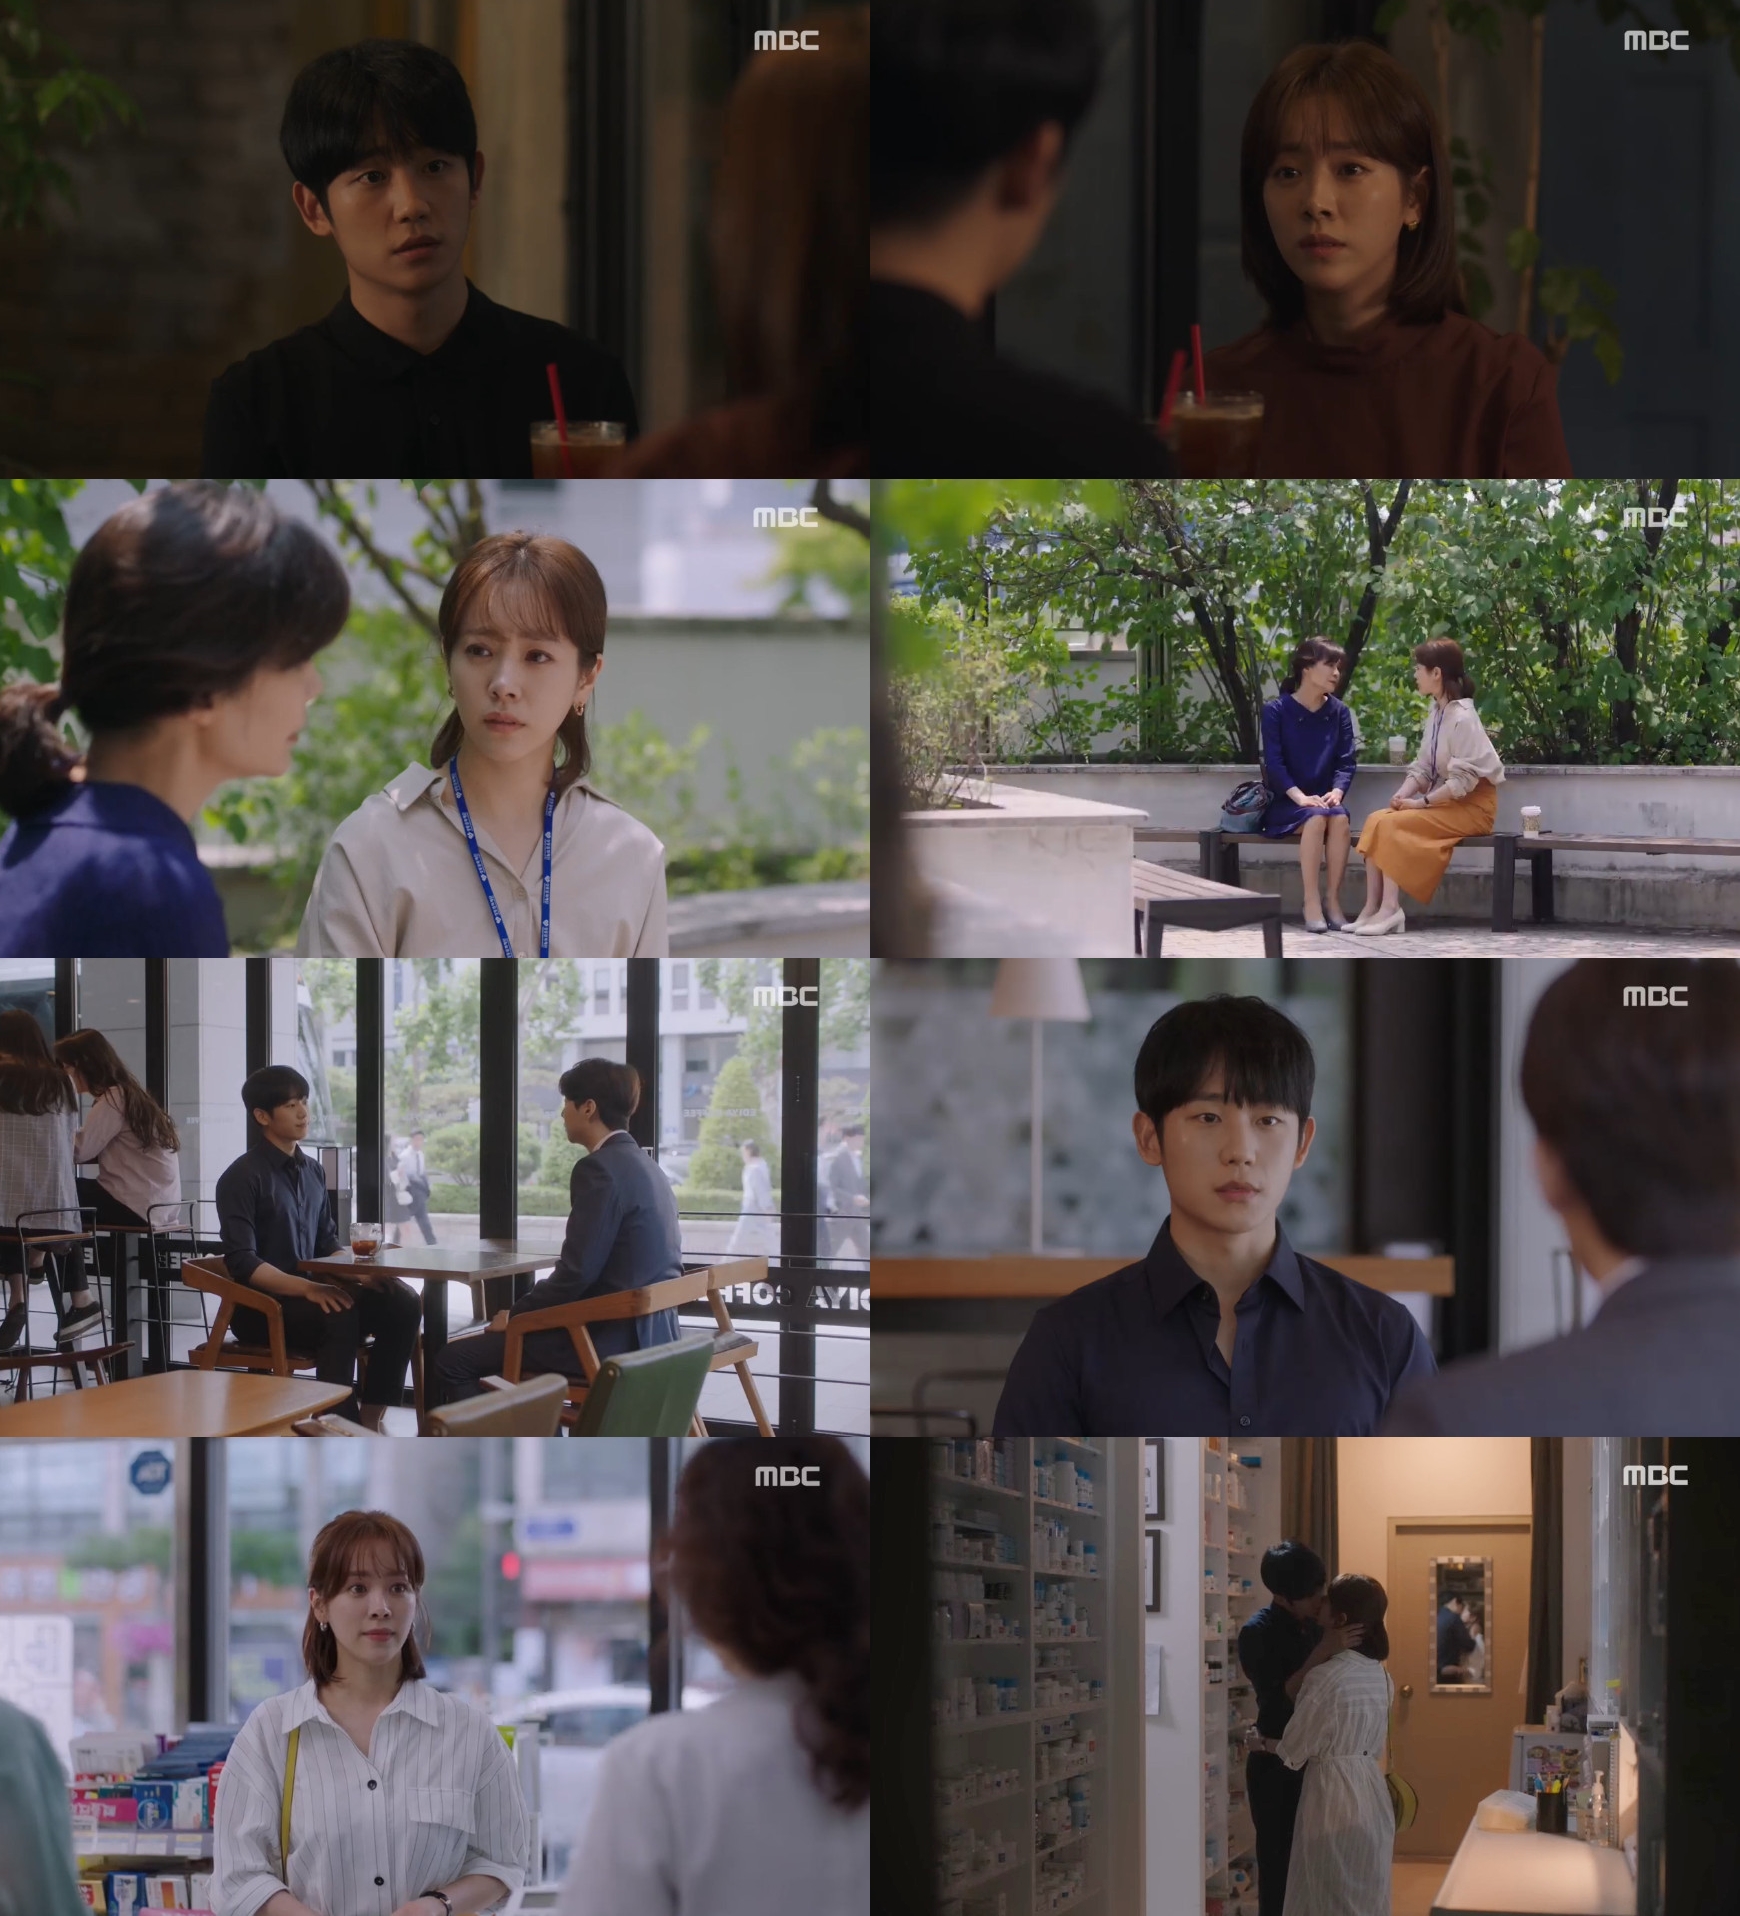 In the MBC drama Spring Night (playplay by Kim Eun, directed by Ahn Pan-seok), which was broadcast on the 11th, the separation of Choi Jung-in (Han Ji-min) by Yoo JiHo (Jeong Hae-in) was implied, giving a breathtaking tension.On this day, Yoo JiHo suddenly heard the news of Yoo Eun-woo (Hians mother), and expressed anxiety accumulated for Choi Jung-in in the spirit of alcohol.Lee Choi Jung-in also said, I am qualified like JiHo.Yoo JiHo told Choi Jung-in, Are you going to abandon us? If you do, its okay. Can I trust Choi Jung-in?Are you sure youll never change?, embarrassing Choi Jung-in.In the meantime, Kwon Gi-seok (Kim Jun-han), who was drunk, was waiting in front of Lee Jung-ins house. I betrayed him once, but can I meet him again?I can believe it? Choi Jung-in asked Kwon Ki-seok, I can believe it. The next day, Yoo JiHo, who met with Lee Jung-in, apologized for the day before.But Lee Jung-in said, The frank feeling I received was I do not think you are the same. I doubt me.I think I jumped without preparation because I was so greedy. Lee Choi Jung-in said, Not because of Mr. JiHo. I thought love would be all. But Mr. JiHos past is so strong.I still have not enough heart, he said. I need time to think.On the other hand, Kwon Ki-seok, who noticed the struggle between the two, said, You can not handle it. Your cheap romance does not fit this Choi Jung-in.In the end, Yoo JiHo, who visited Kwon Ki-seok, warned Kwon Ki-seok, who still ignores himself, not to touch his people anymore with cold eyes.After returning to the pharmacy, Yoo JiHo was surprised to find this Choi Jung-in who was waiting for him.Yoo JiHo, who regained his smile to the excitement of Choi Jung-in, I want to squeeze one and give me the medicine I want to eat when I feel frustrated, relieved viewers by checking the love again with a warm kiss.Spring Night, which is curious whether Lee Jung-in and Yoo JiHo will overcome Lee Tae-haks opposition and face a happy ending, ends at 8:55 pm today (12th).